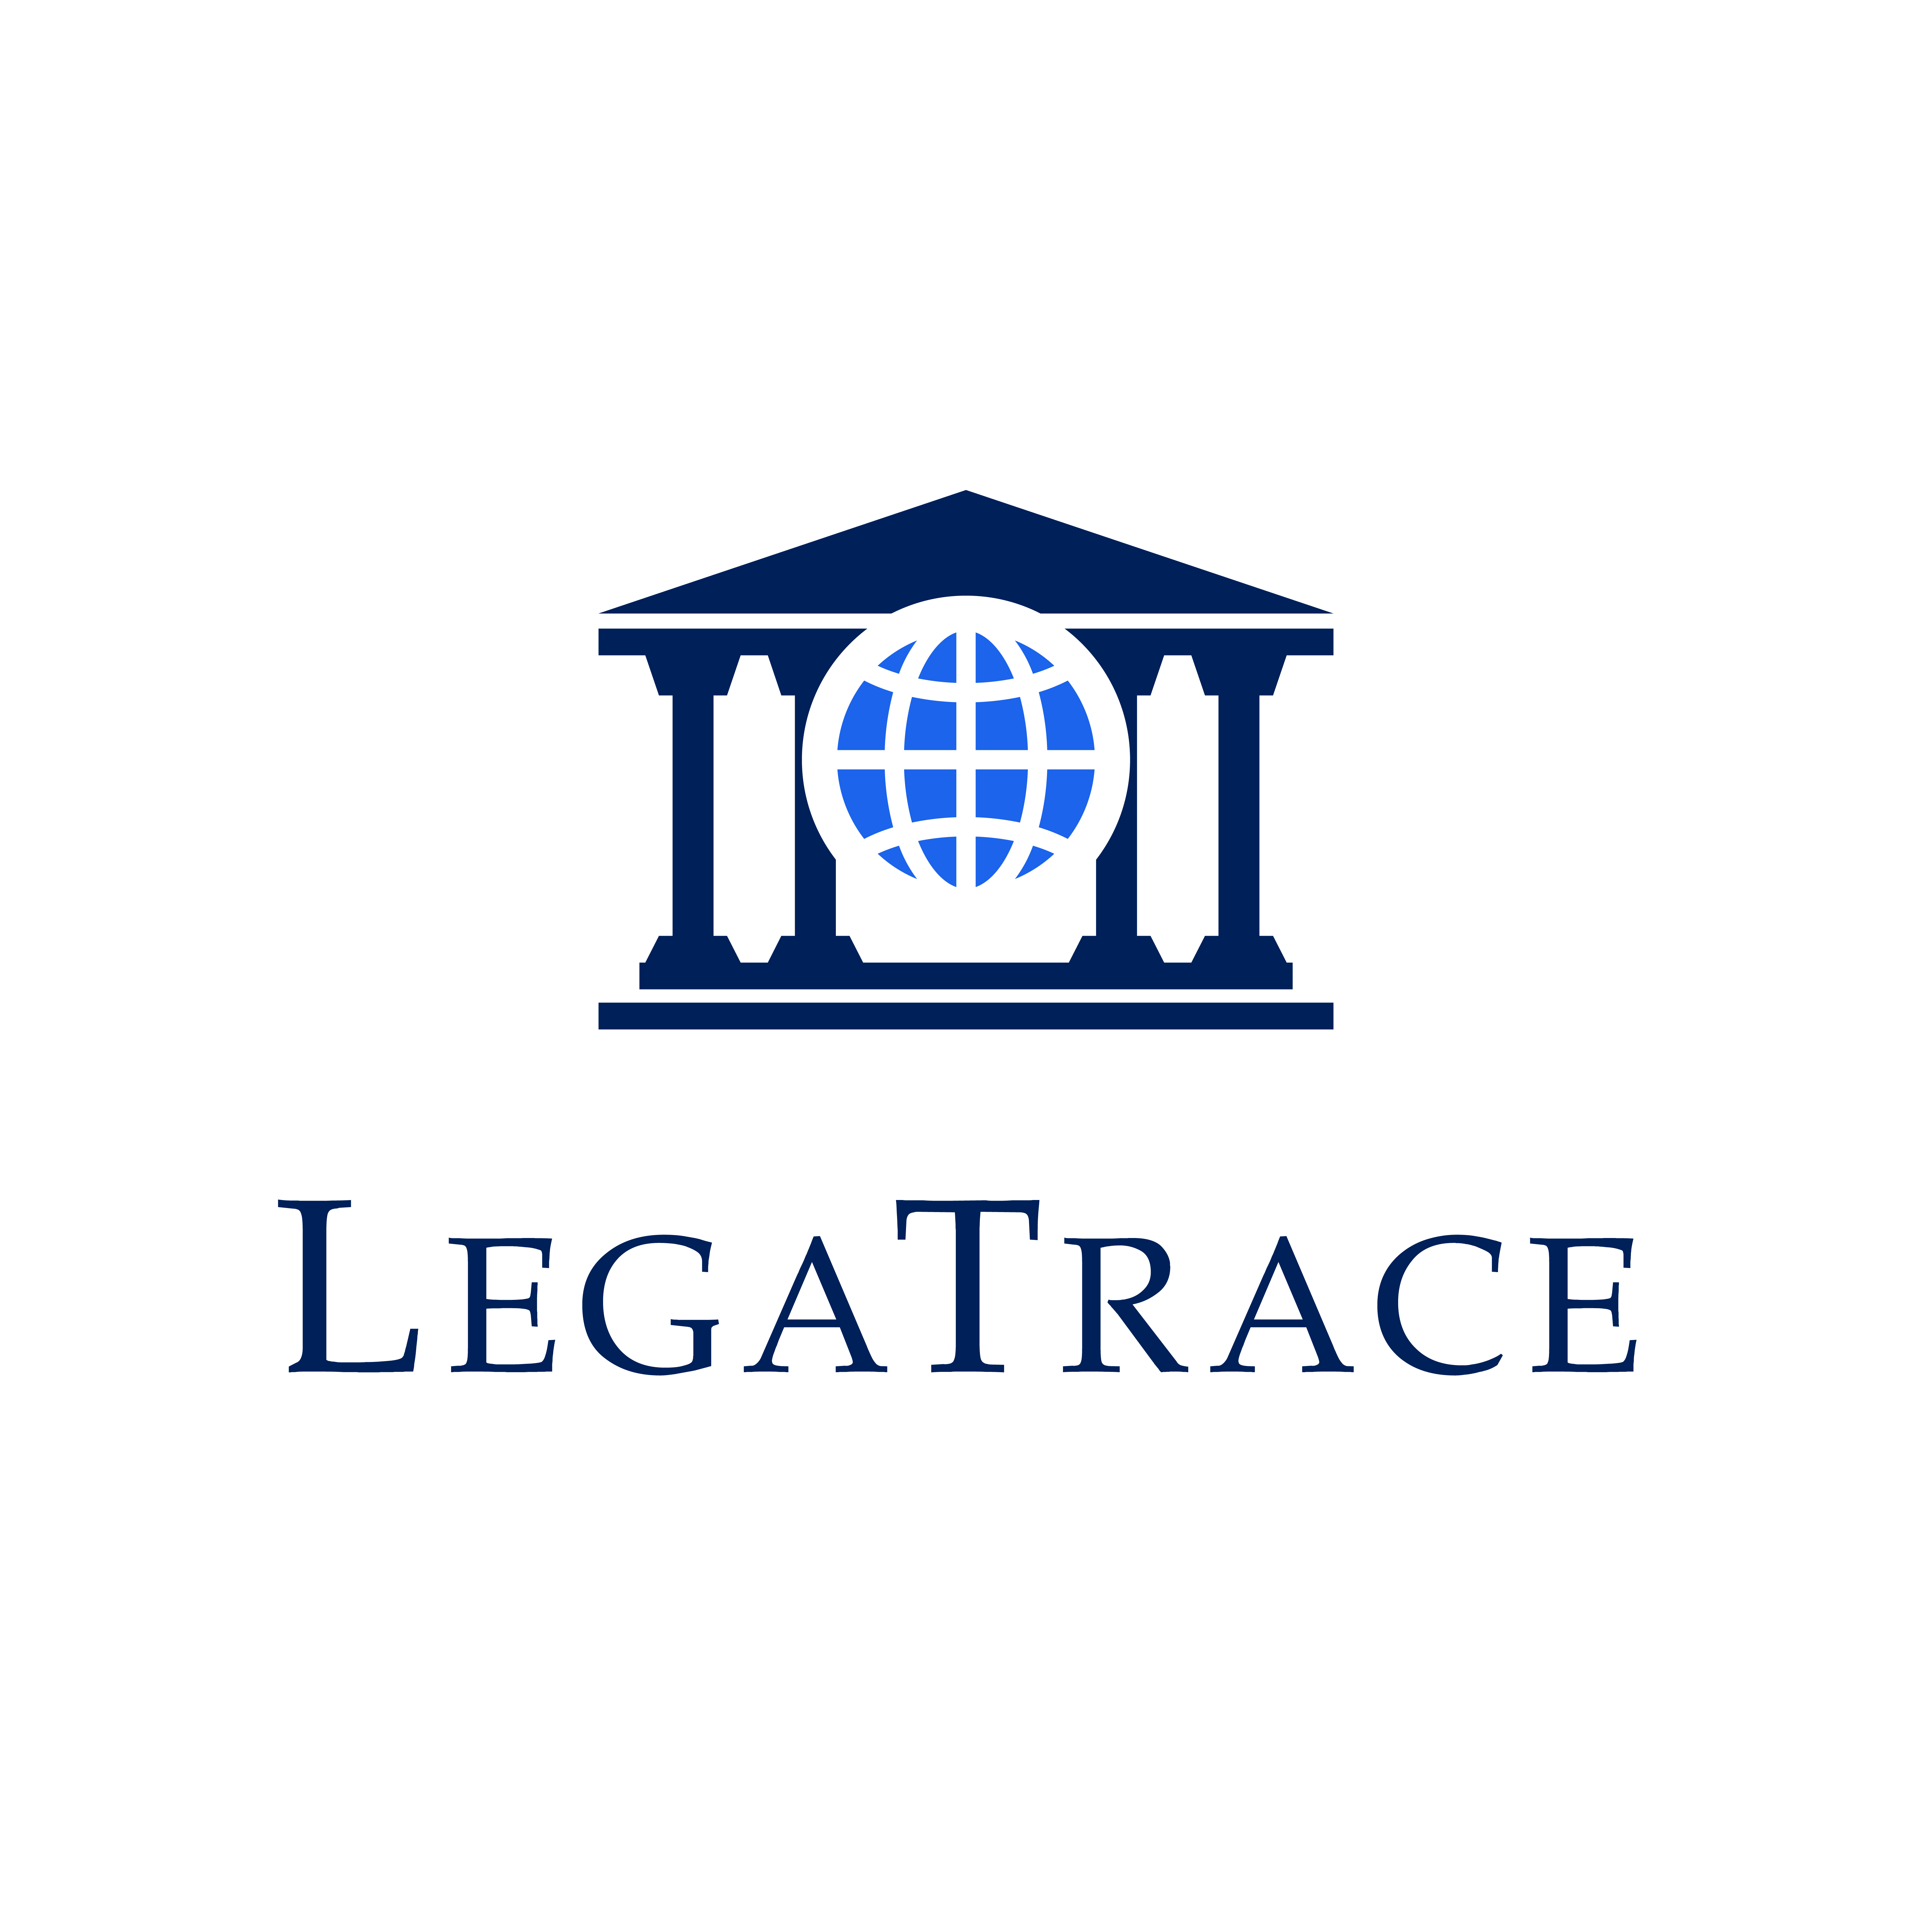 LegaTrace, by LawyerServices